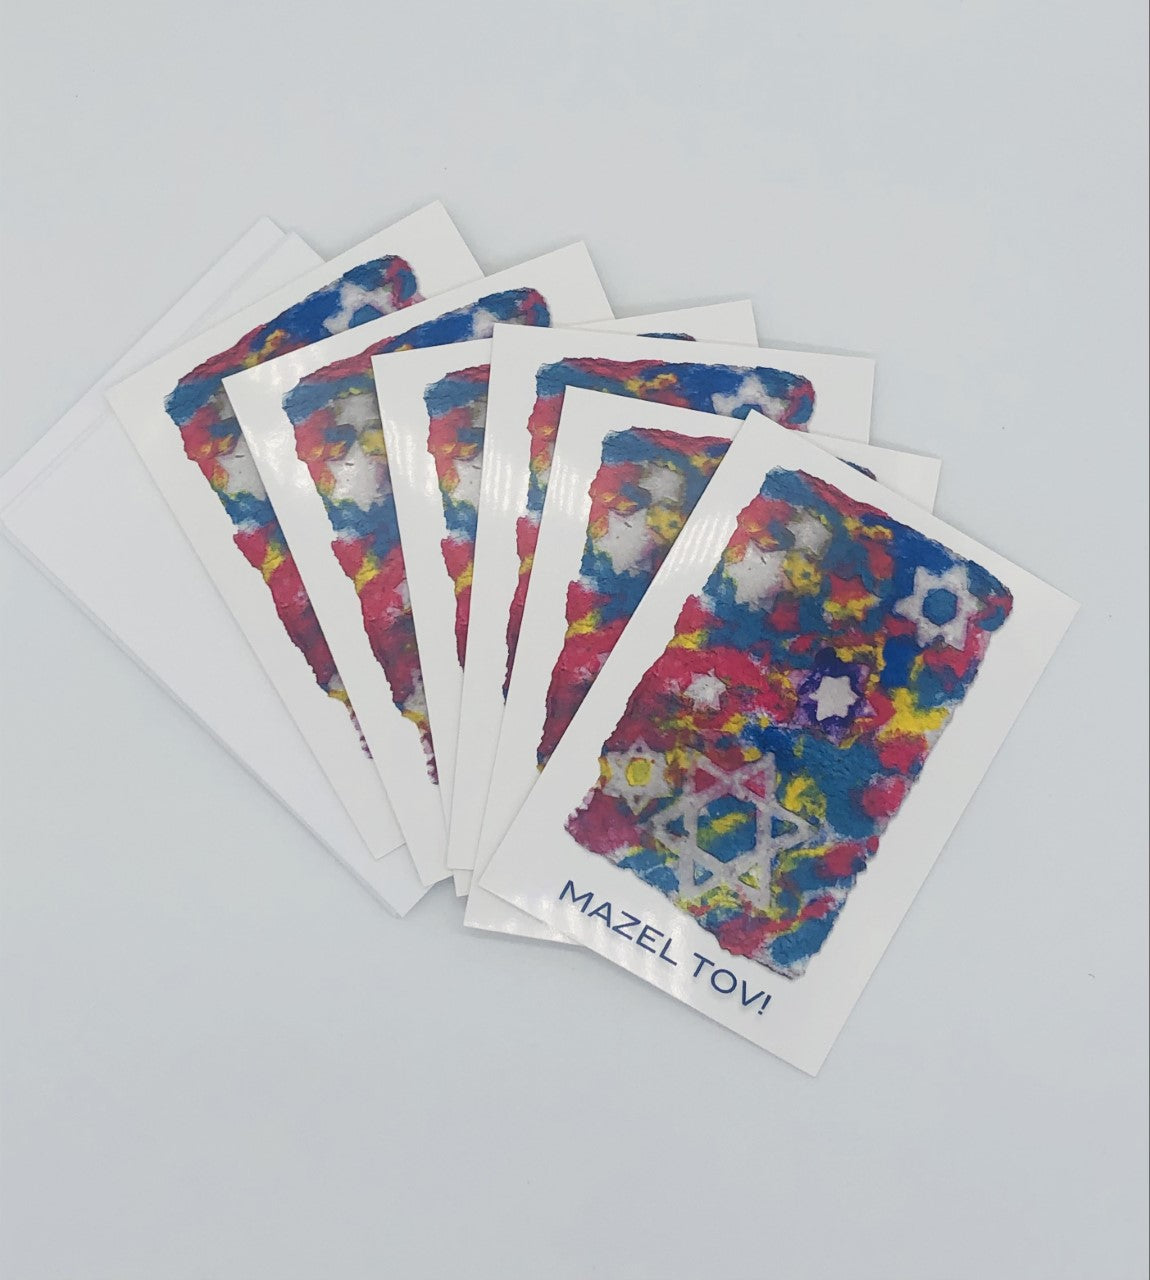 Pack of Graphic greeting cards with blue, red and yellow Jewish stars with Mazel Tov at the bottom